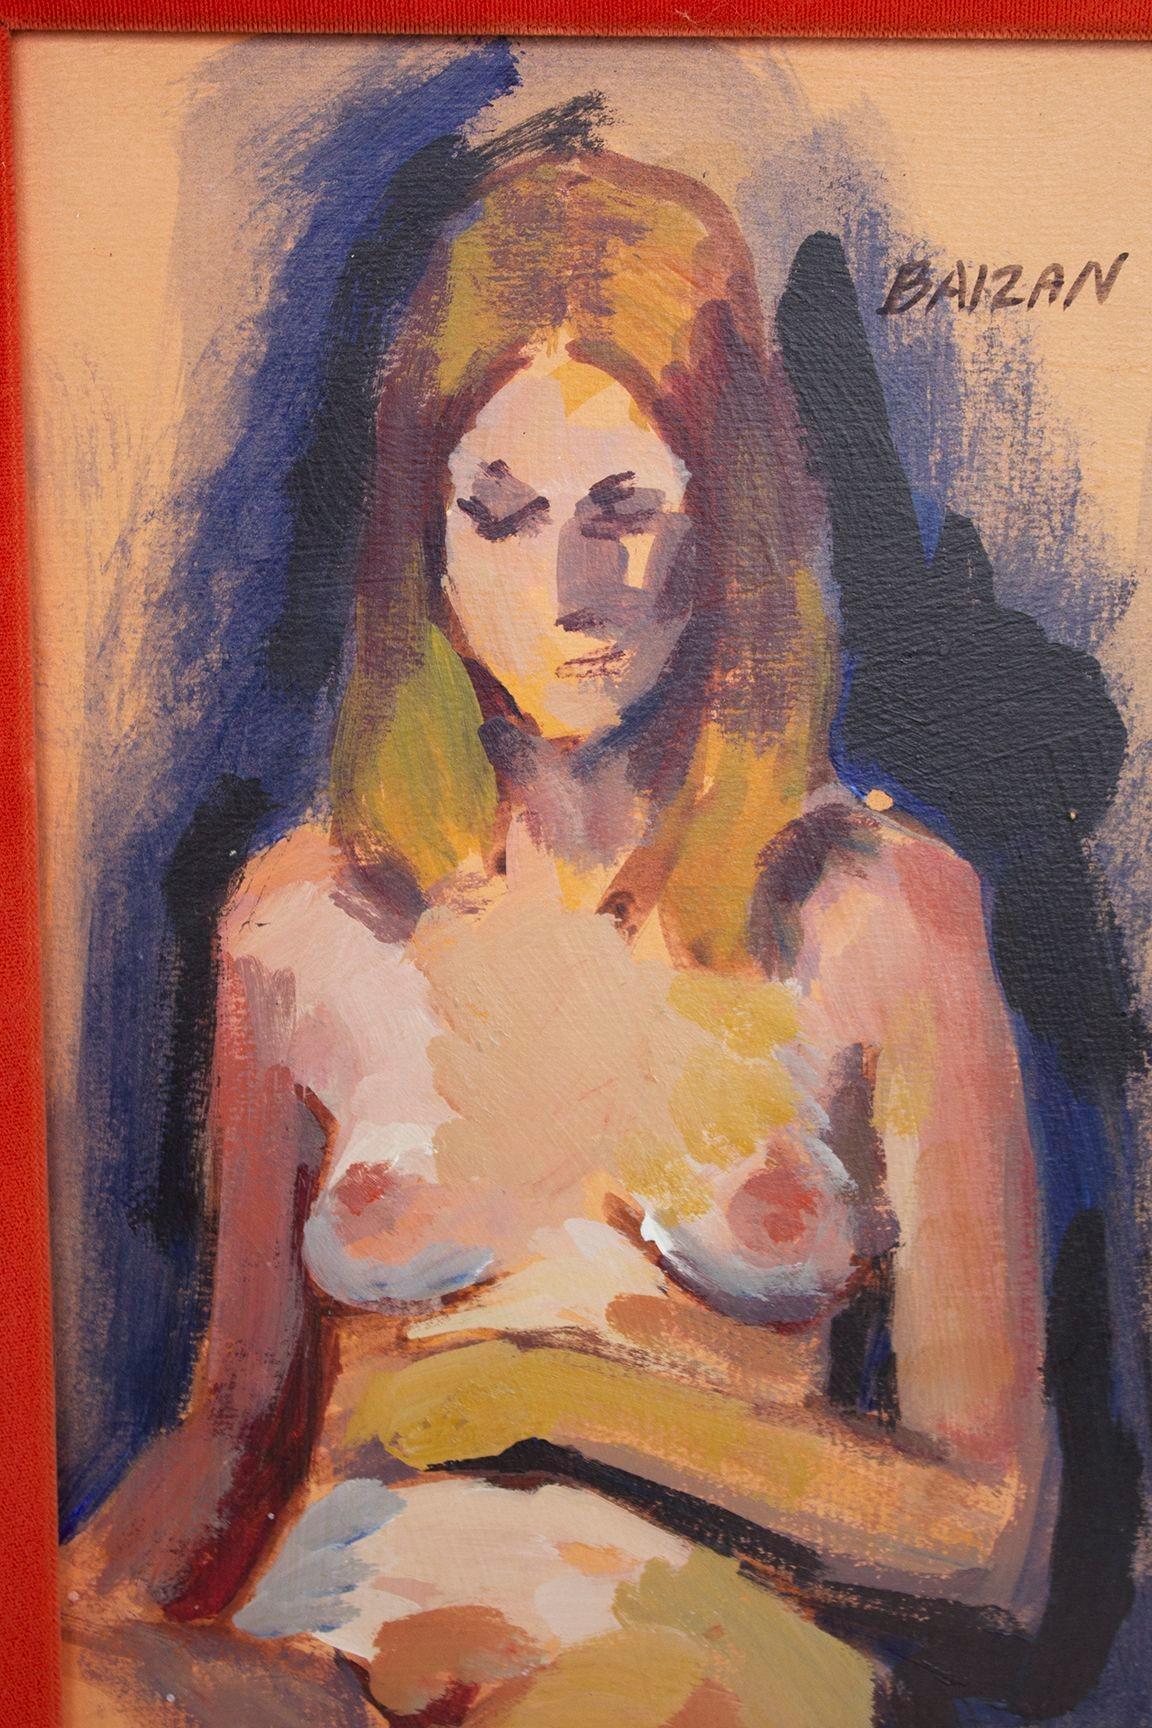 USA, 1970s
Female nude painting in bold colors on thick paper, gilt frame with a persimmon velvet matte. Signed 'Baizan'. Reverse has a label from Galleria Luisa, a now closed local gallery in town. 
Condition notes: In very good vintage condition